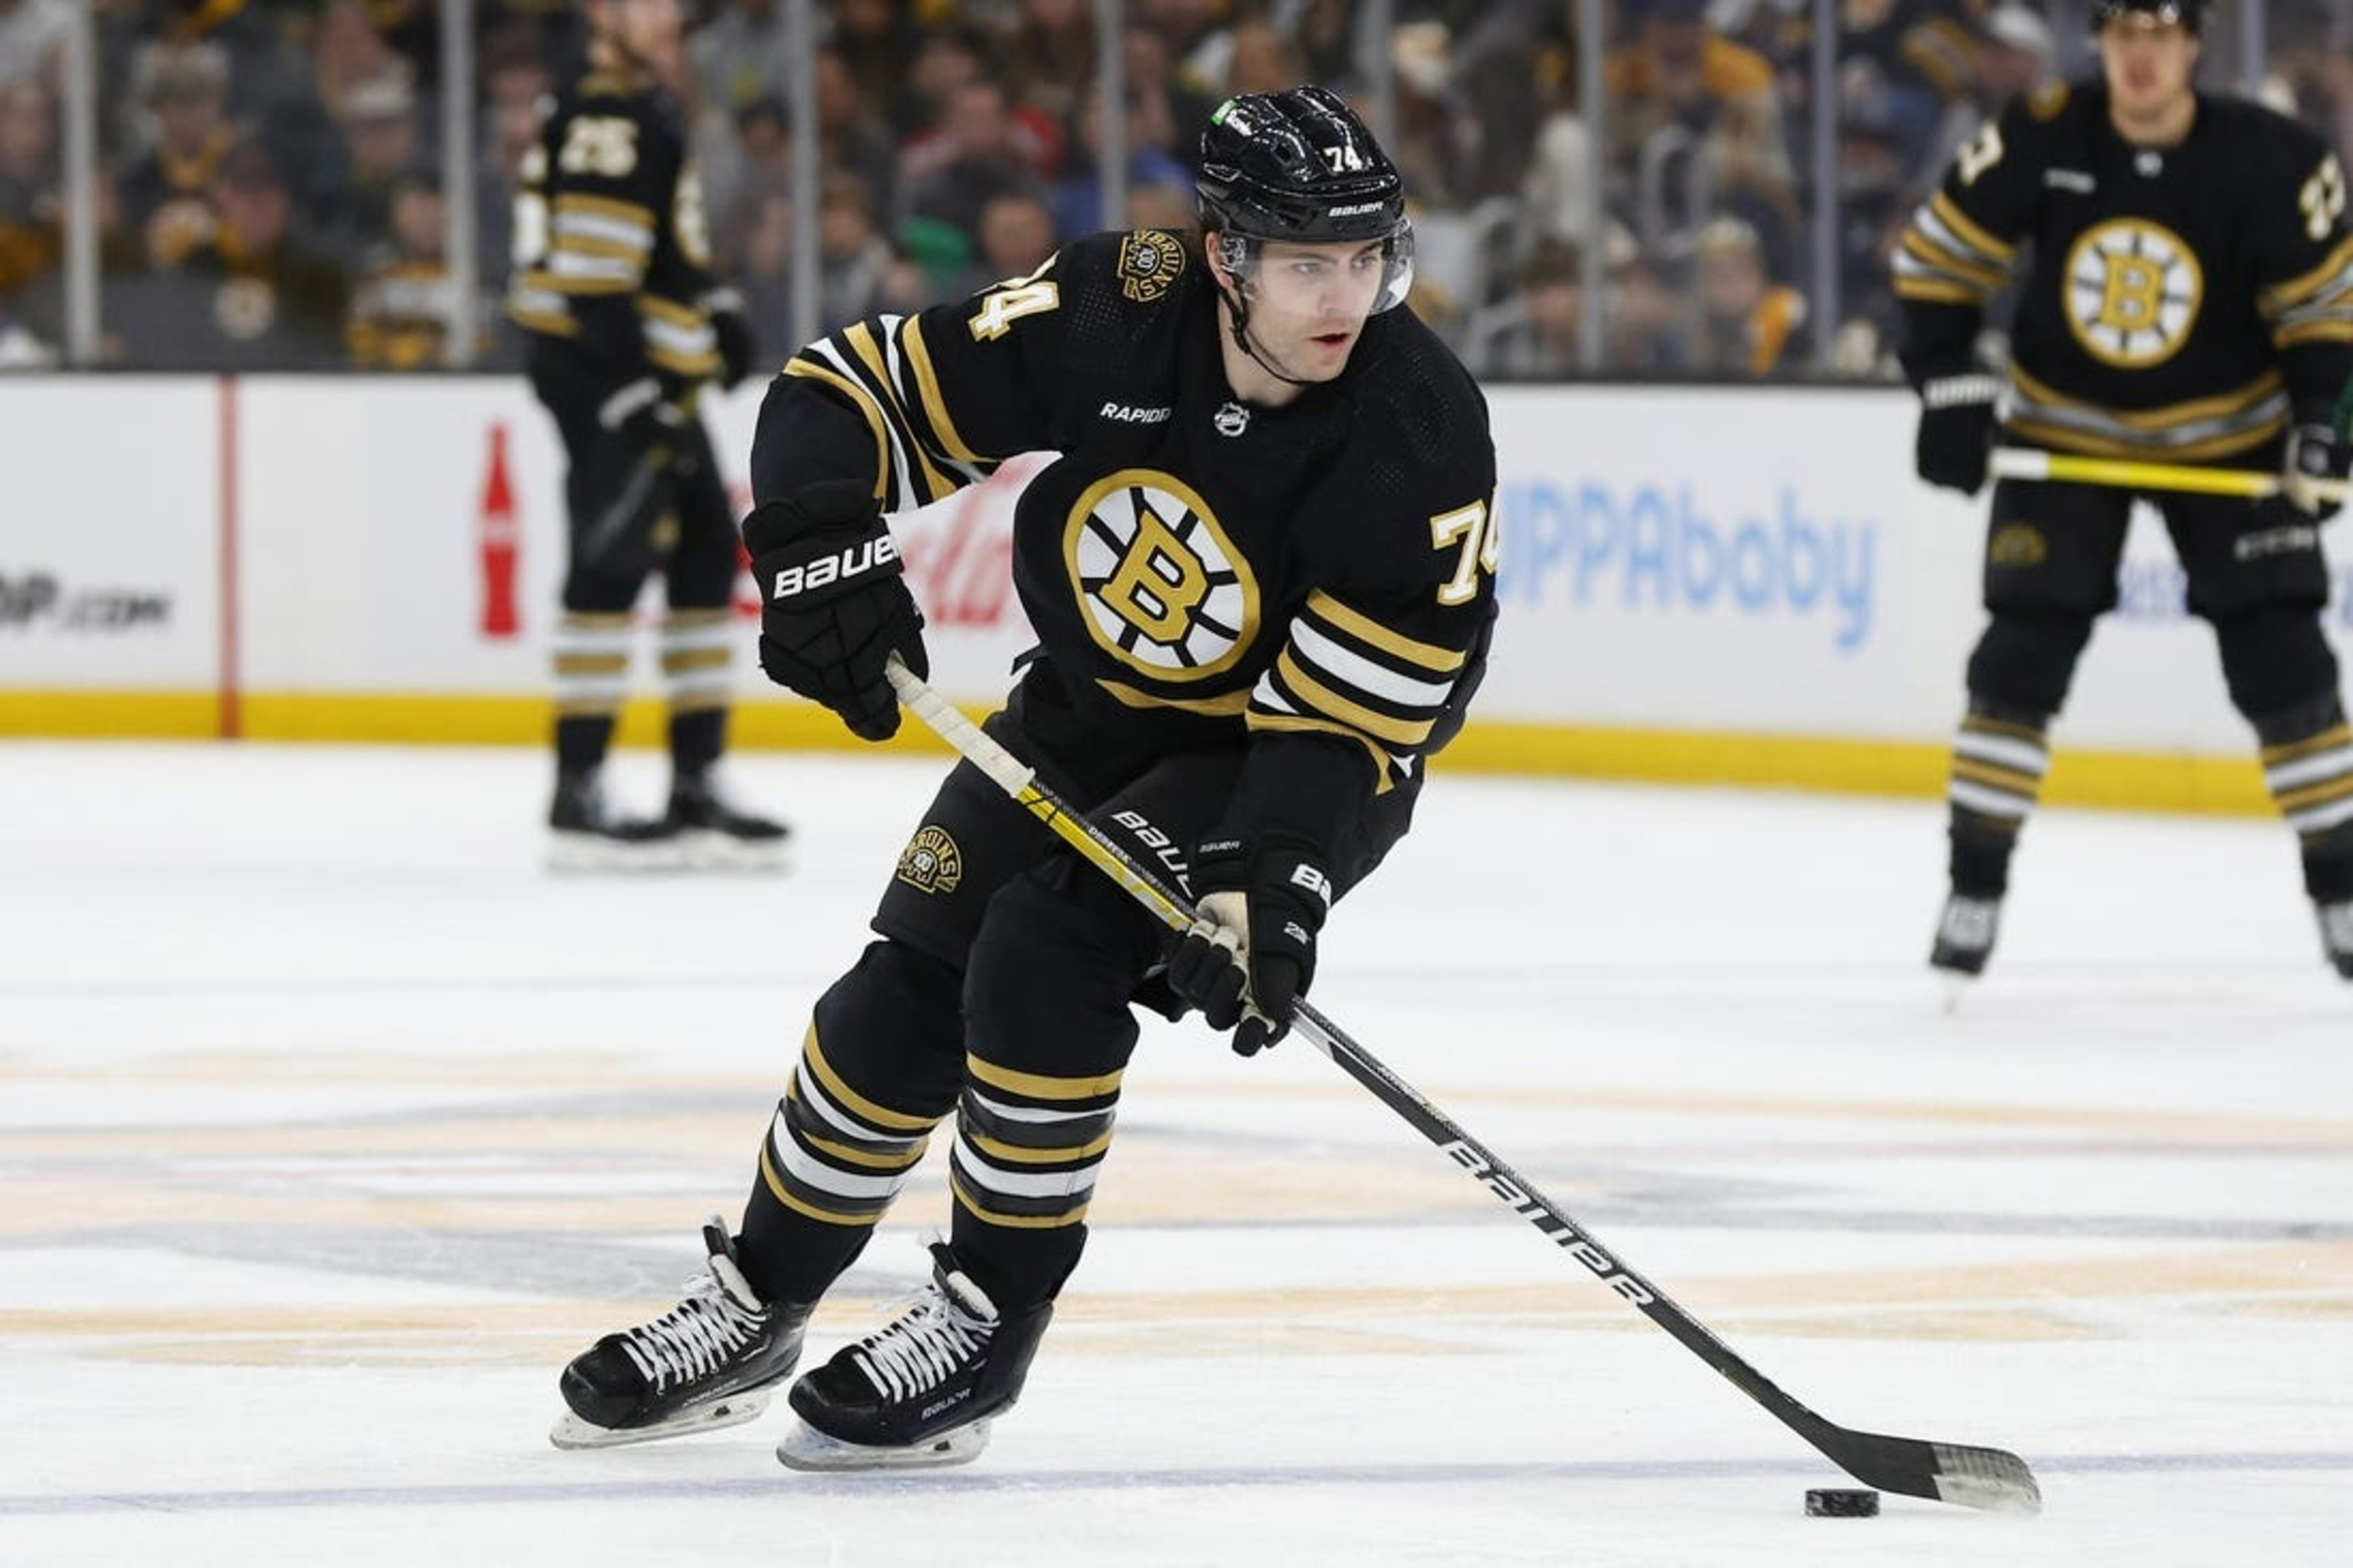 With losing streak a distant memory, Bruins take aim at Jackets